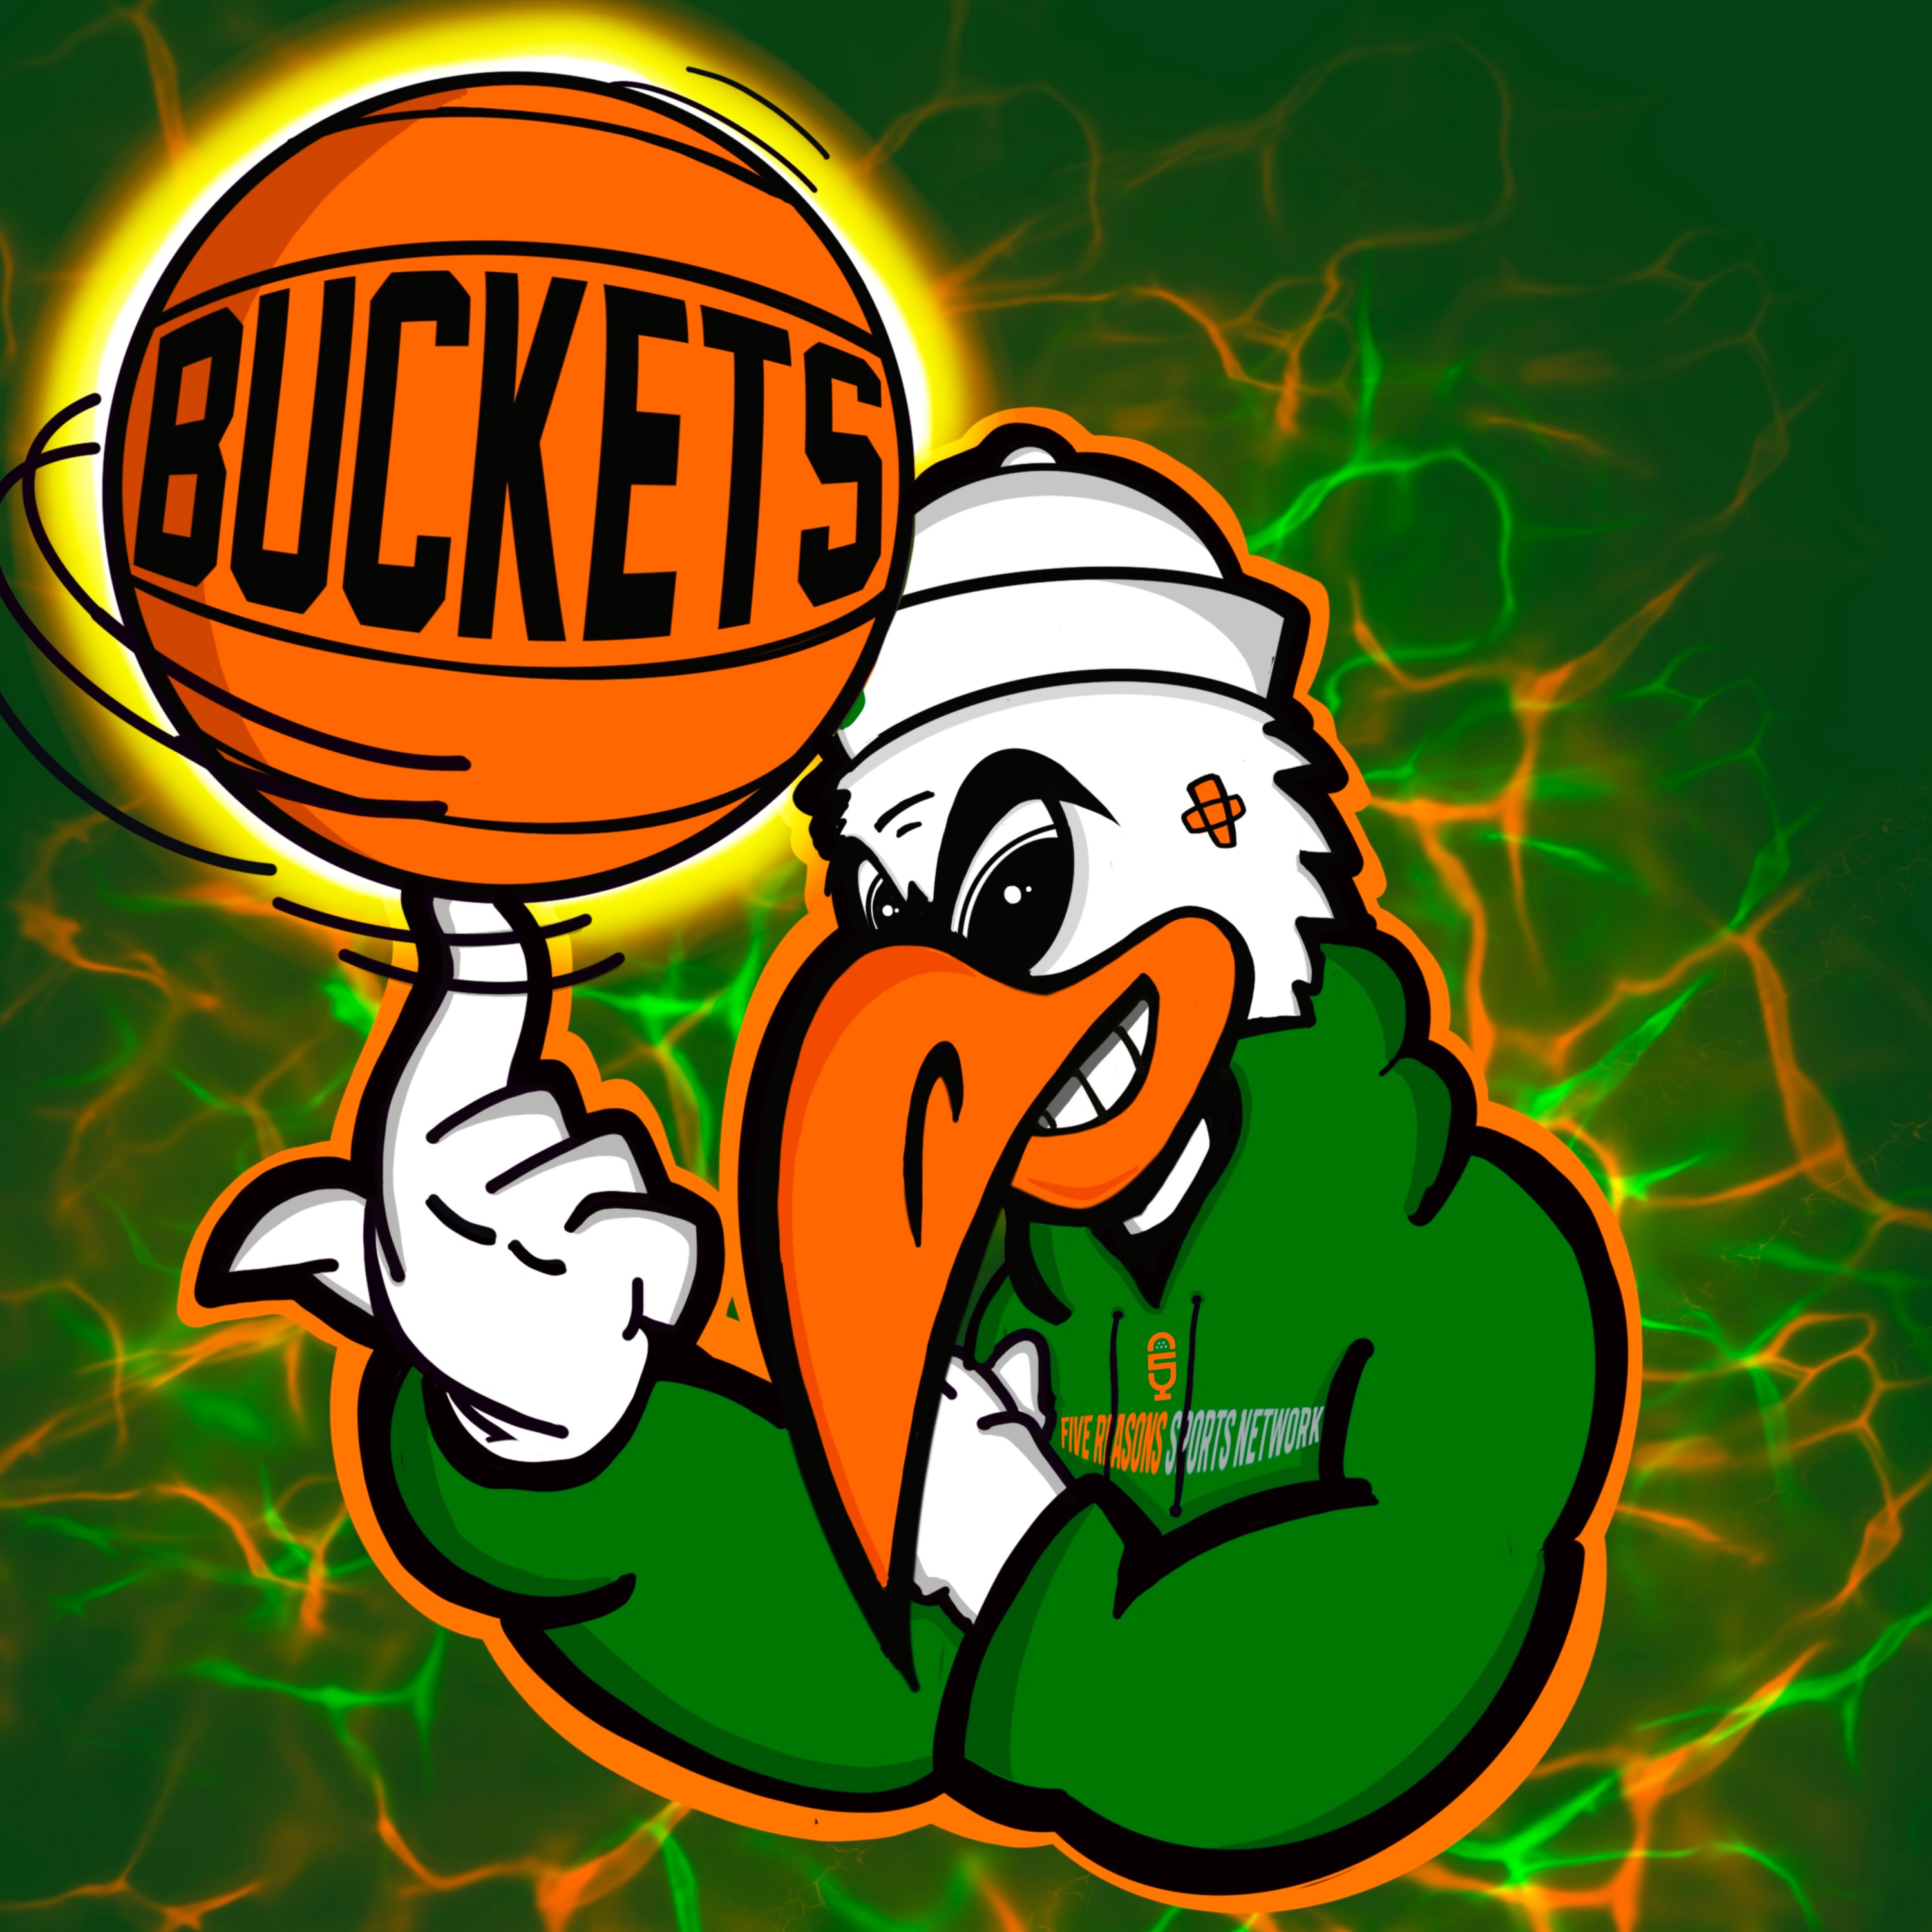 Buckets Live from All Canes | Buckets